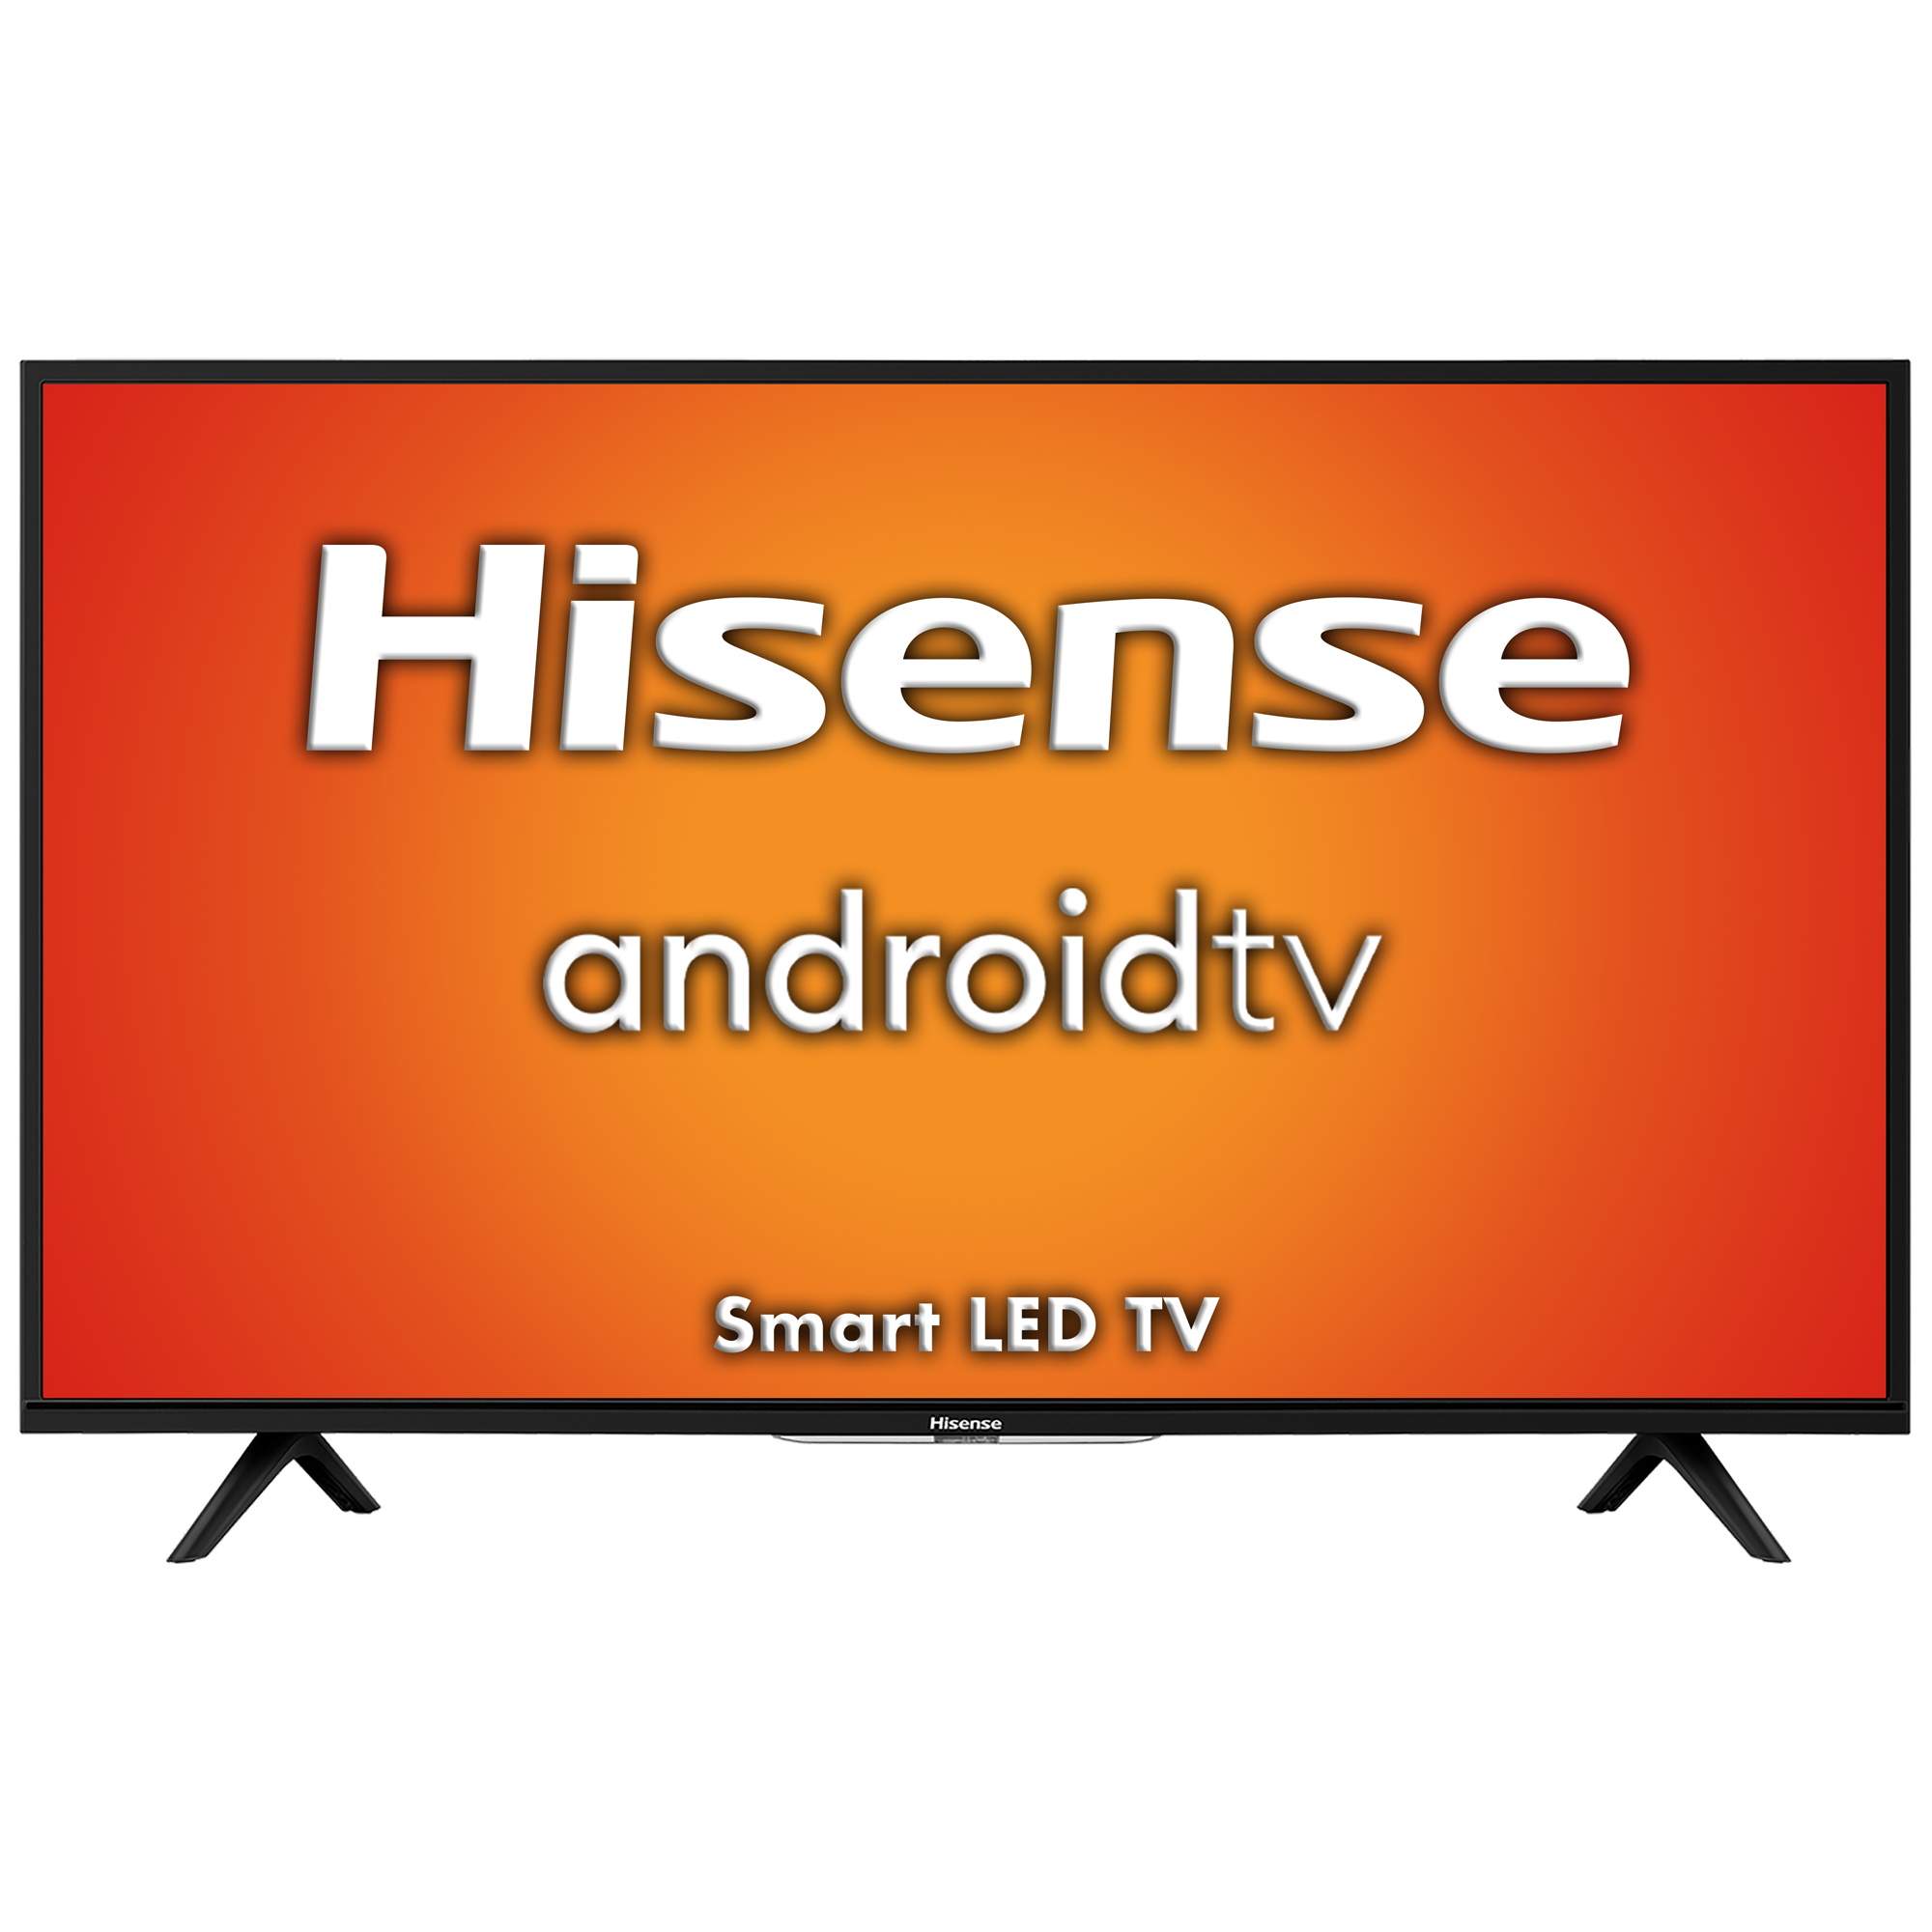 Hisense A56 Series 80cm (32 Inch) HD Ready LED Android Smart TV (1 Year Warranty, Built-in Chromecast, 32A56E, Black)_1